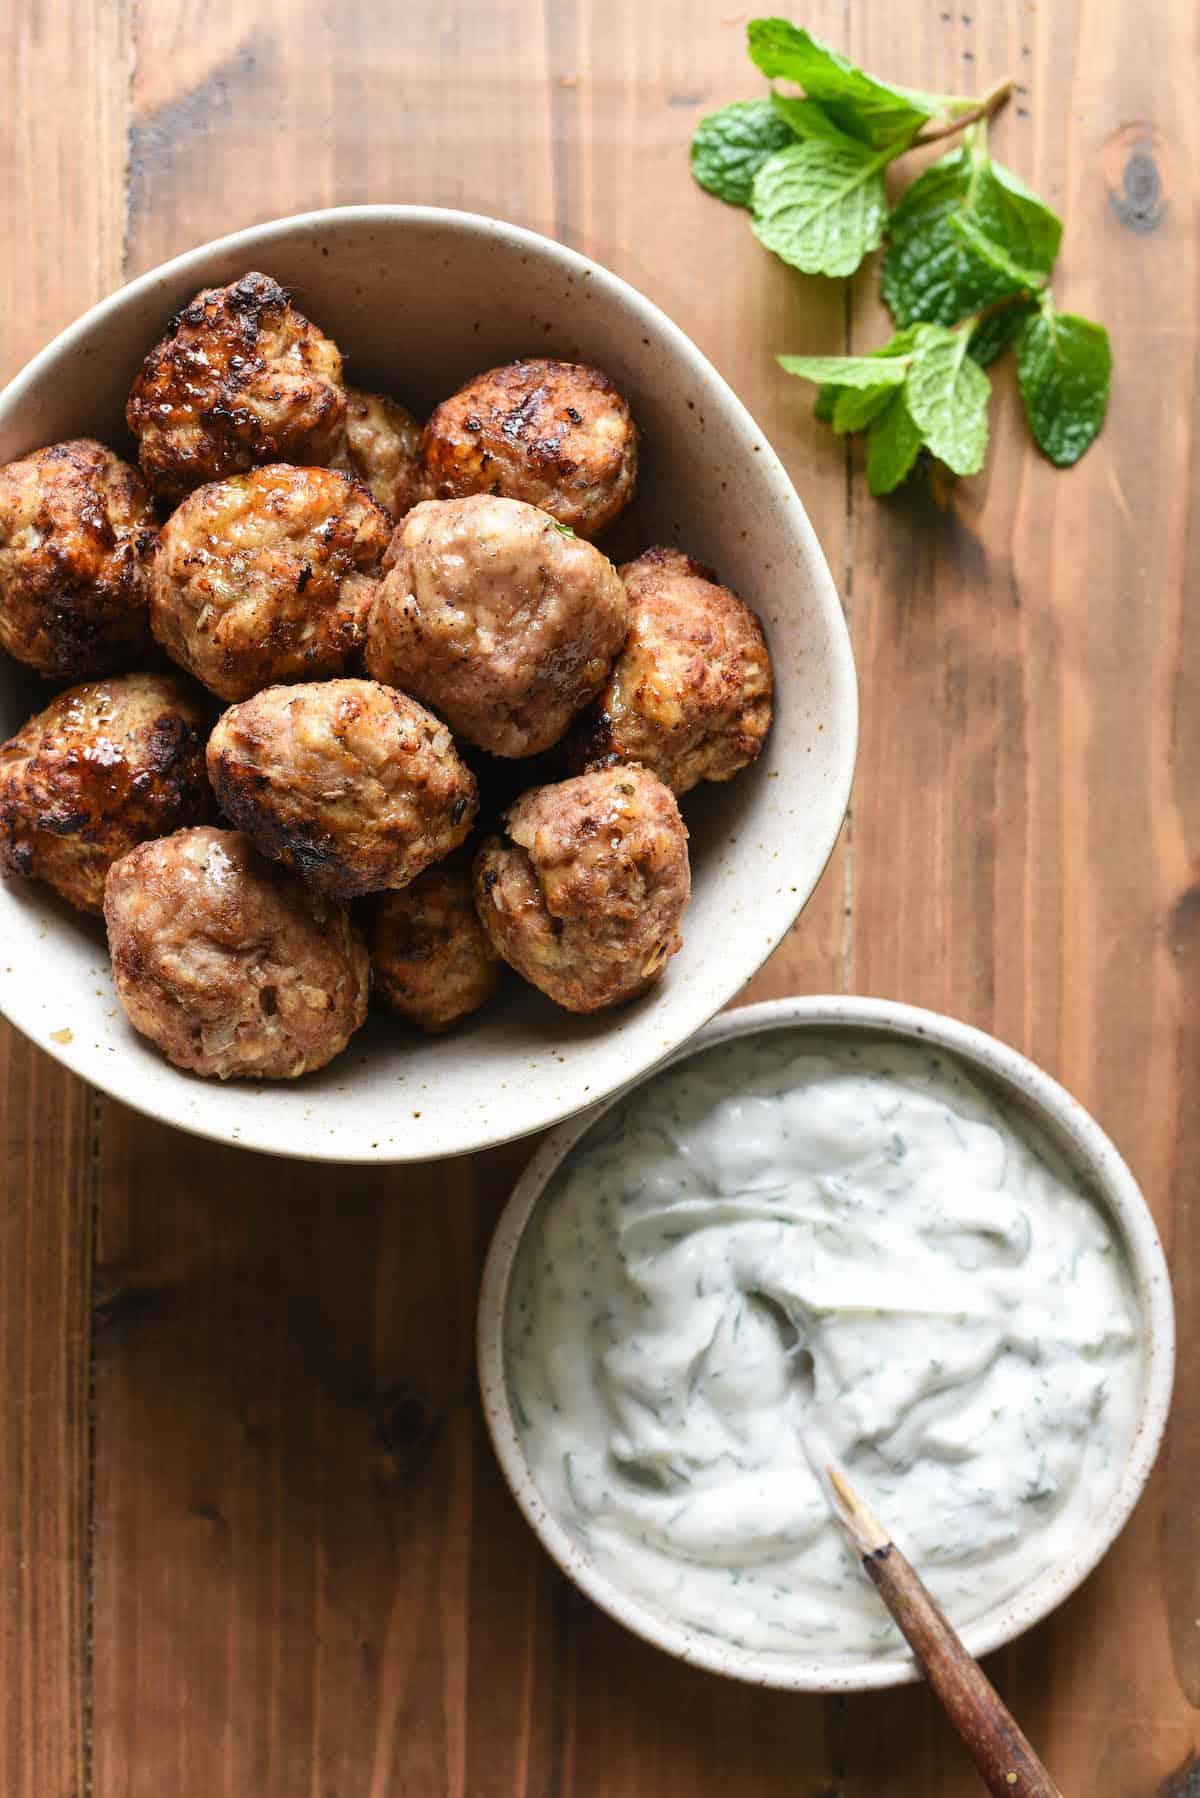 A bowl of air fryer turkey meatballs and a bowl of herbed yogurt sauce, with a mint sprig.